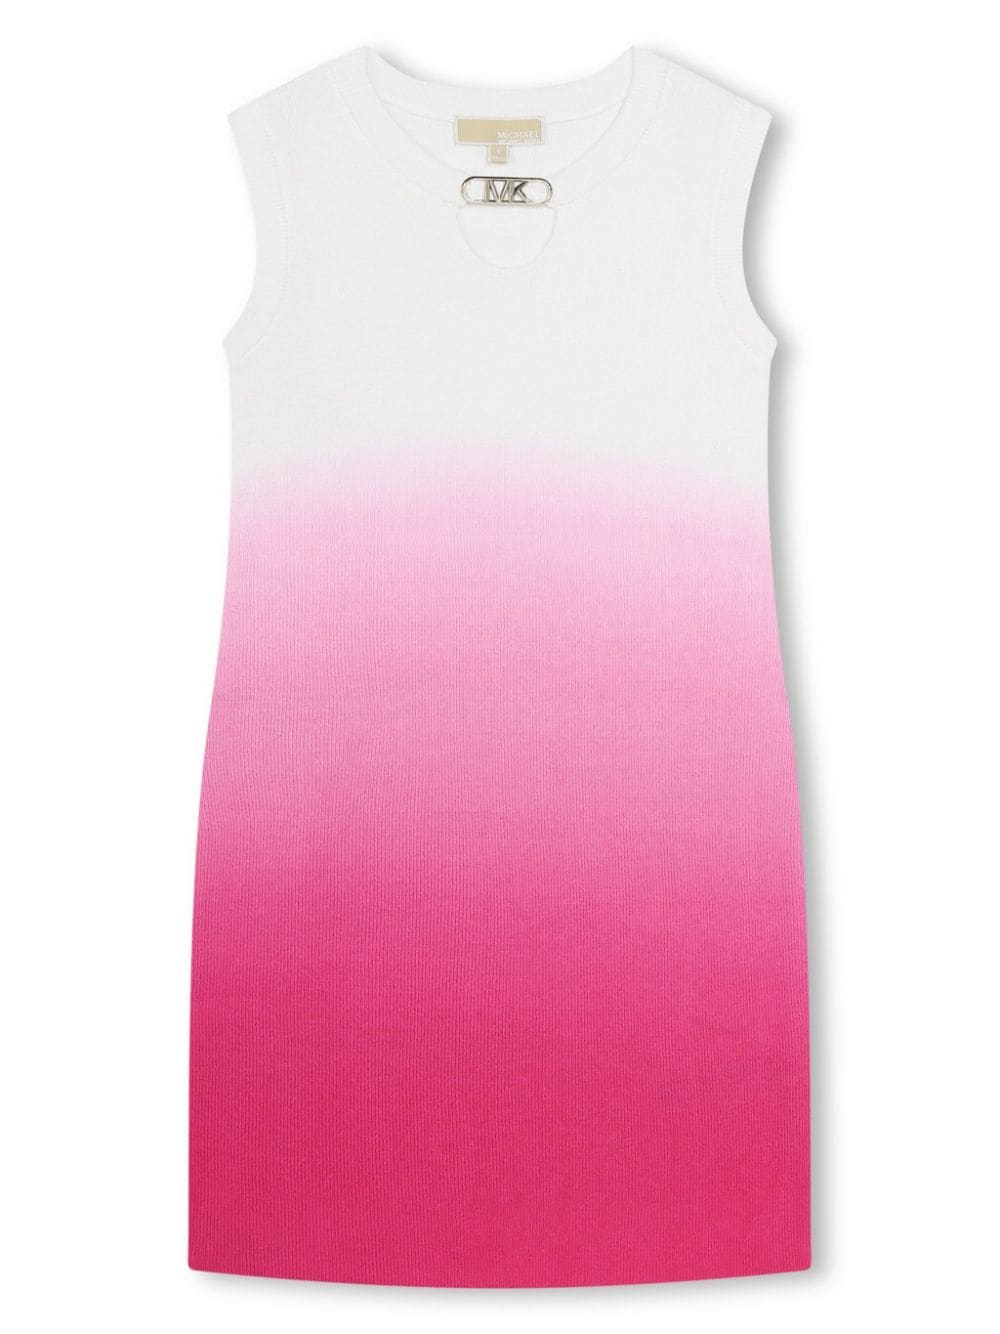 White and fuchsia dress for girls with logo